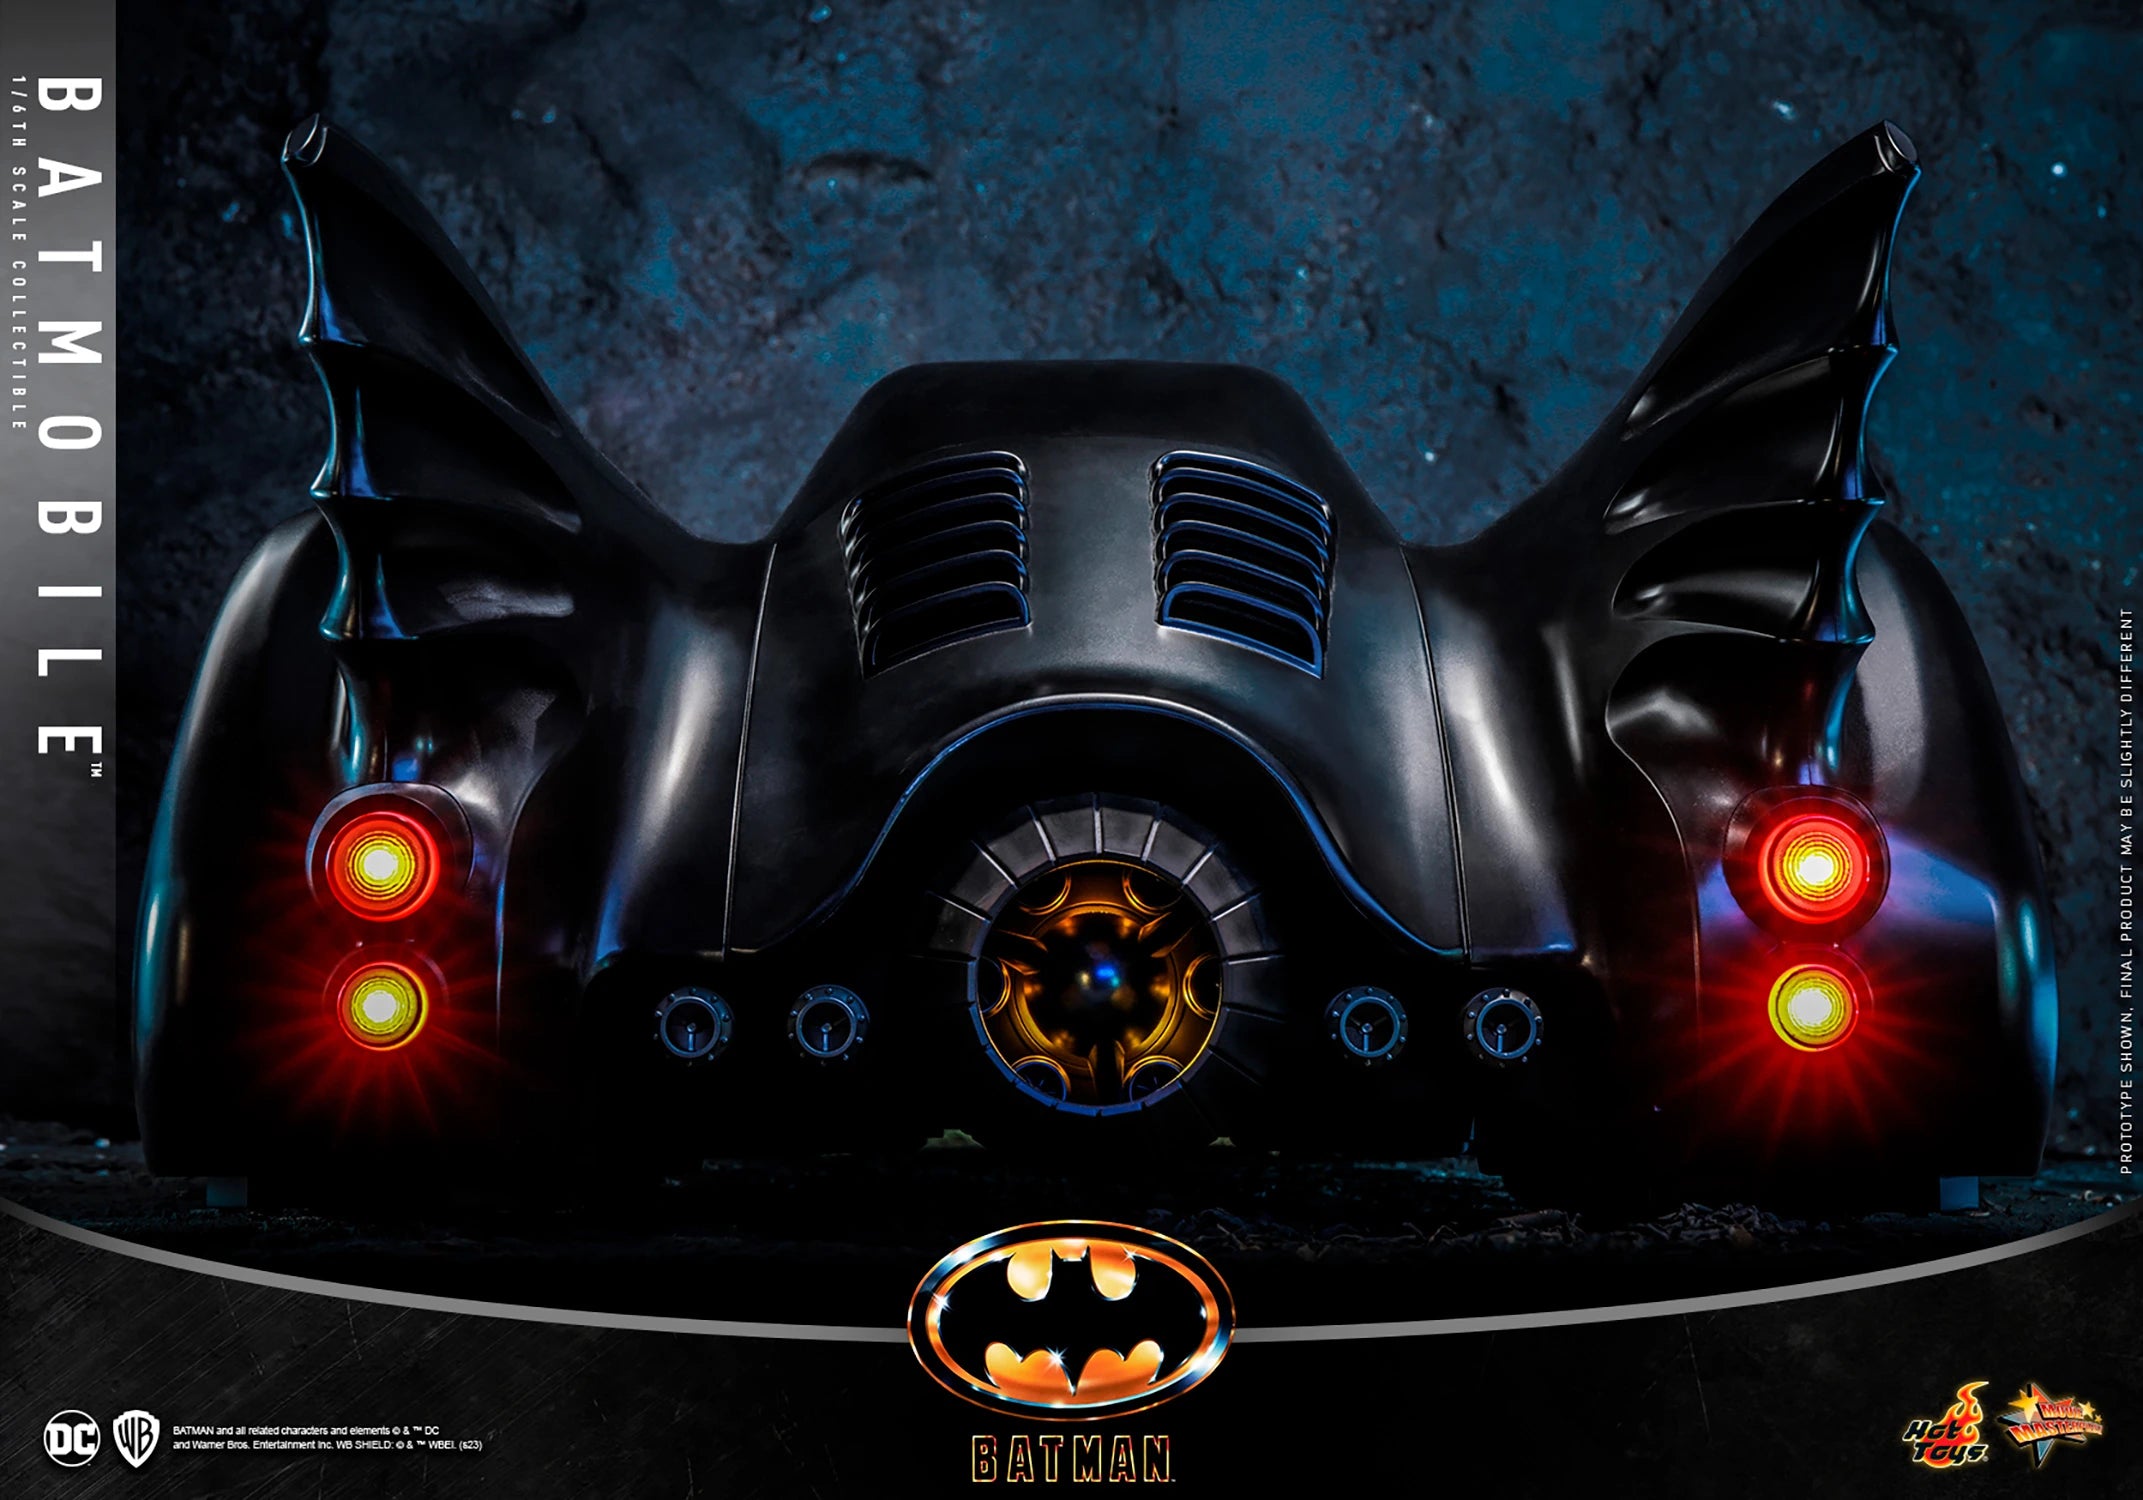 BATMOBILE Sixth Scale Figure Accessory by Hot Toys